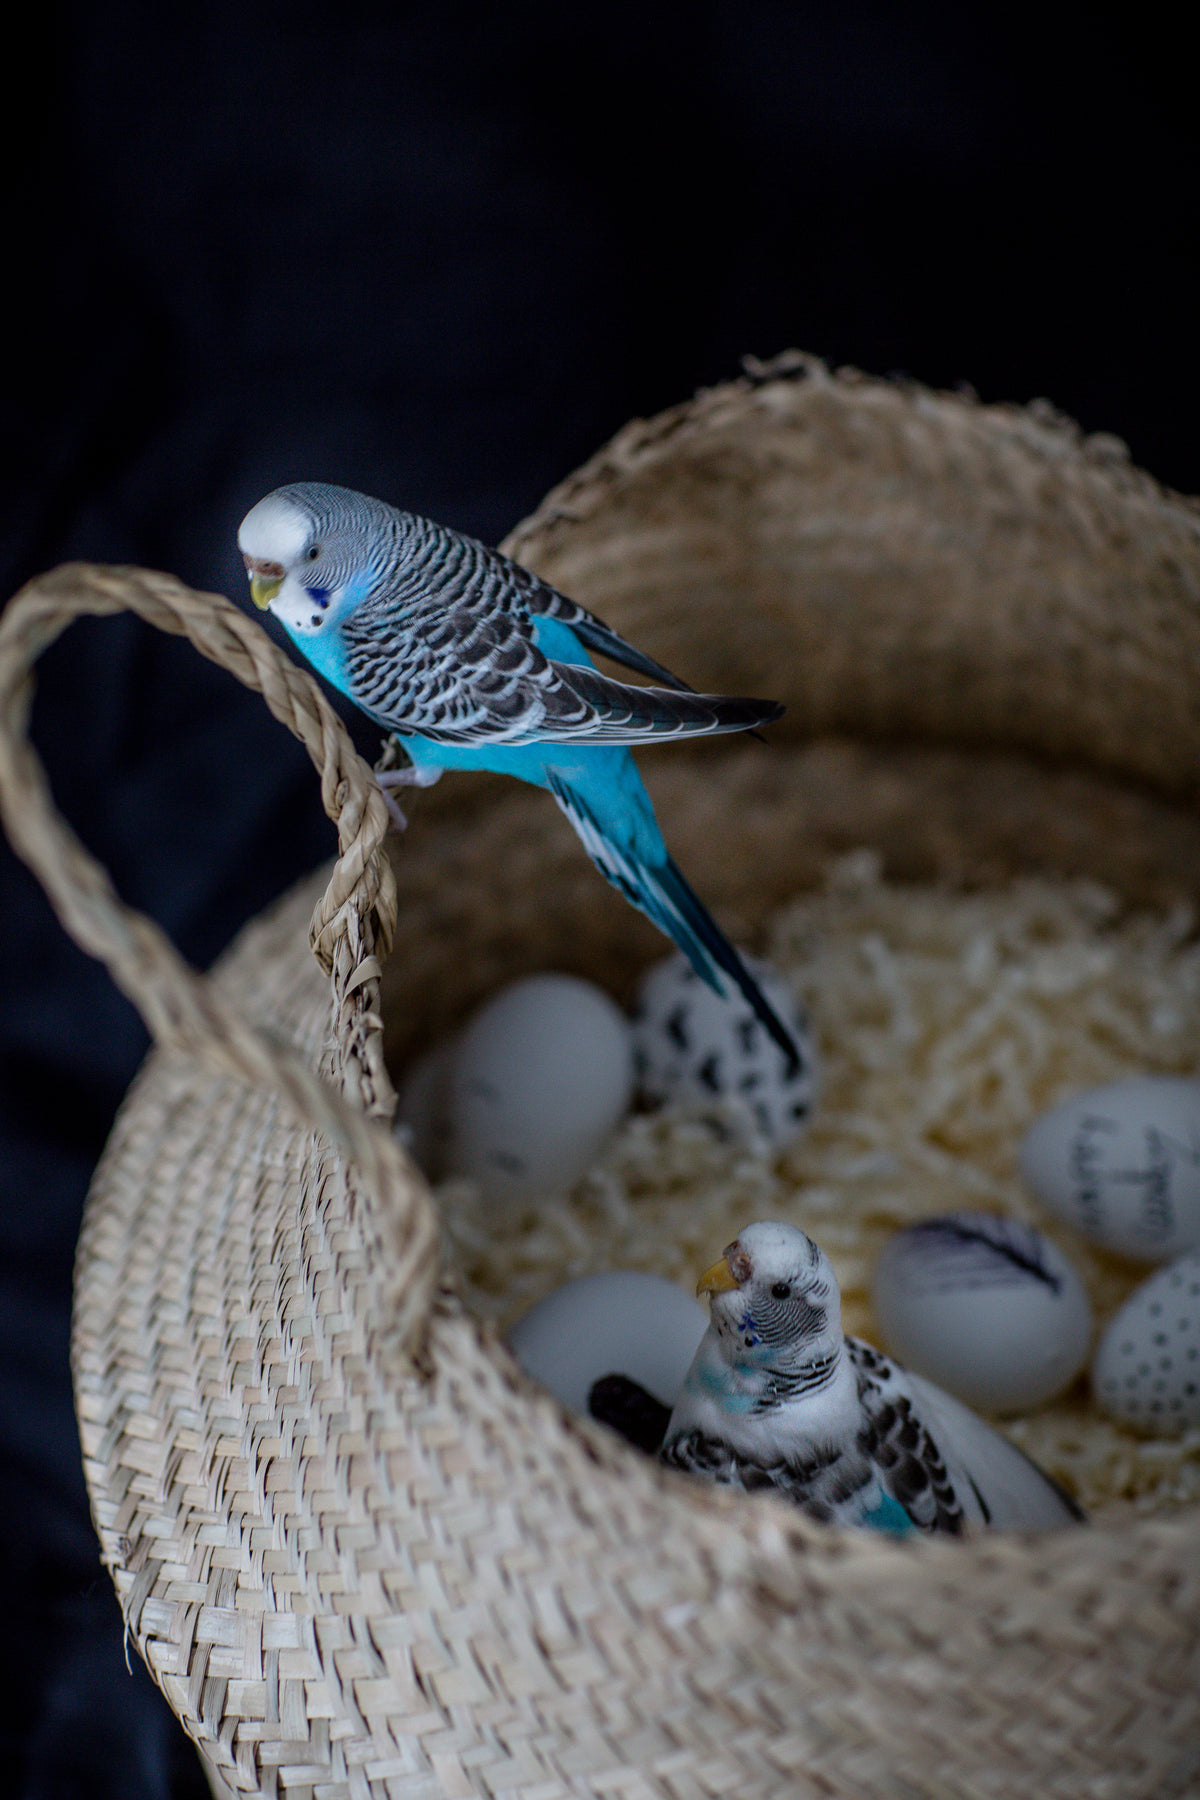 bird perched on a basket protecting her eggs